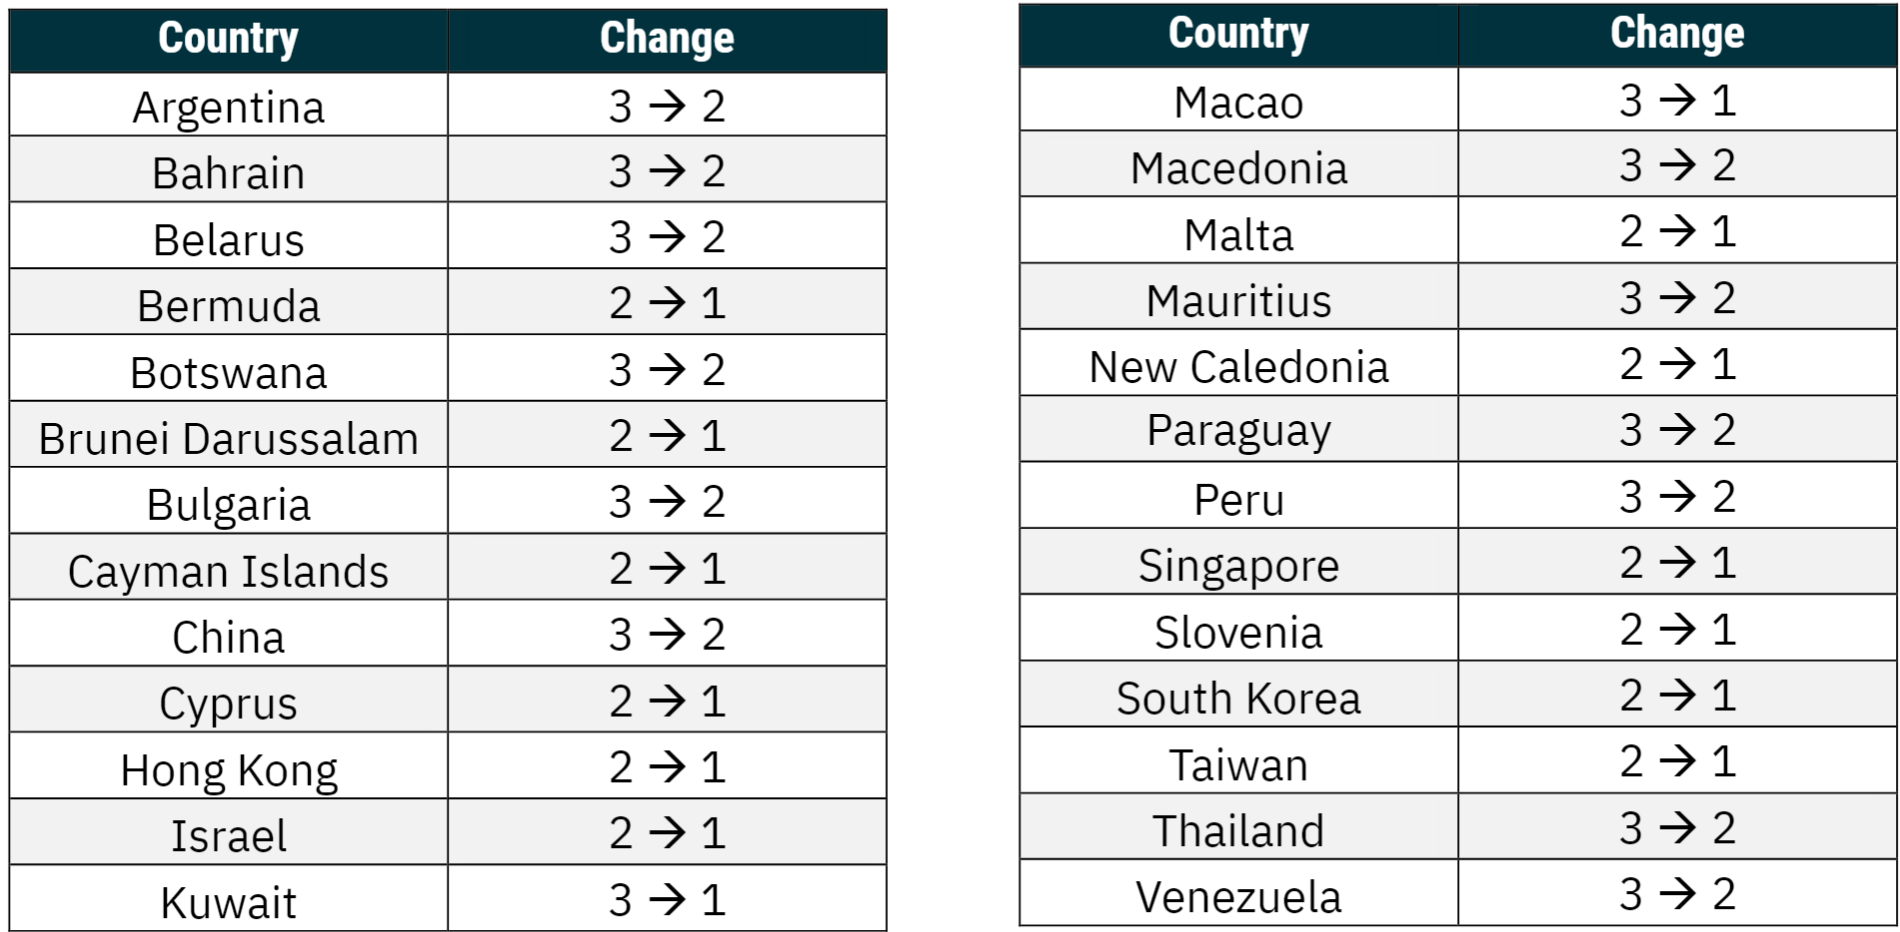 Increasing: Updated country regions to match the modern, globalized economy